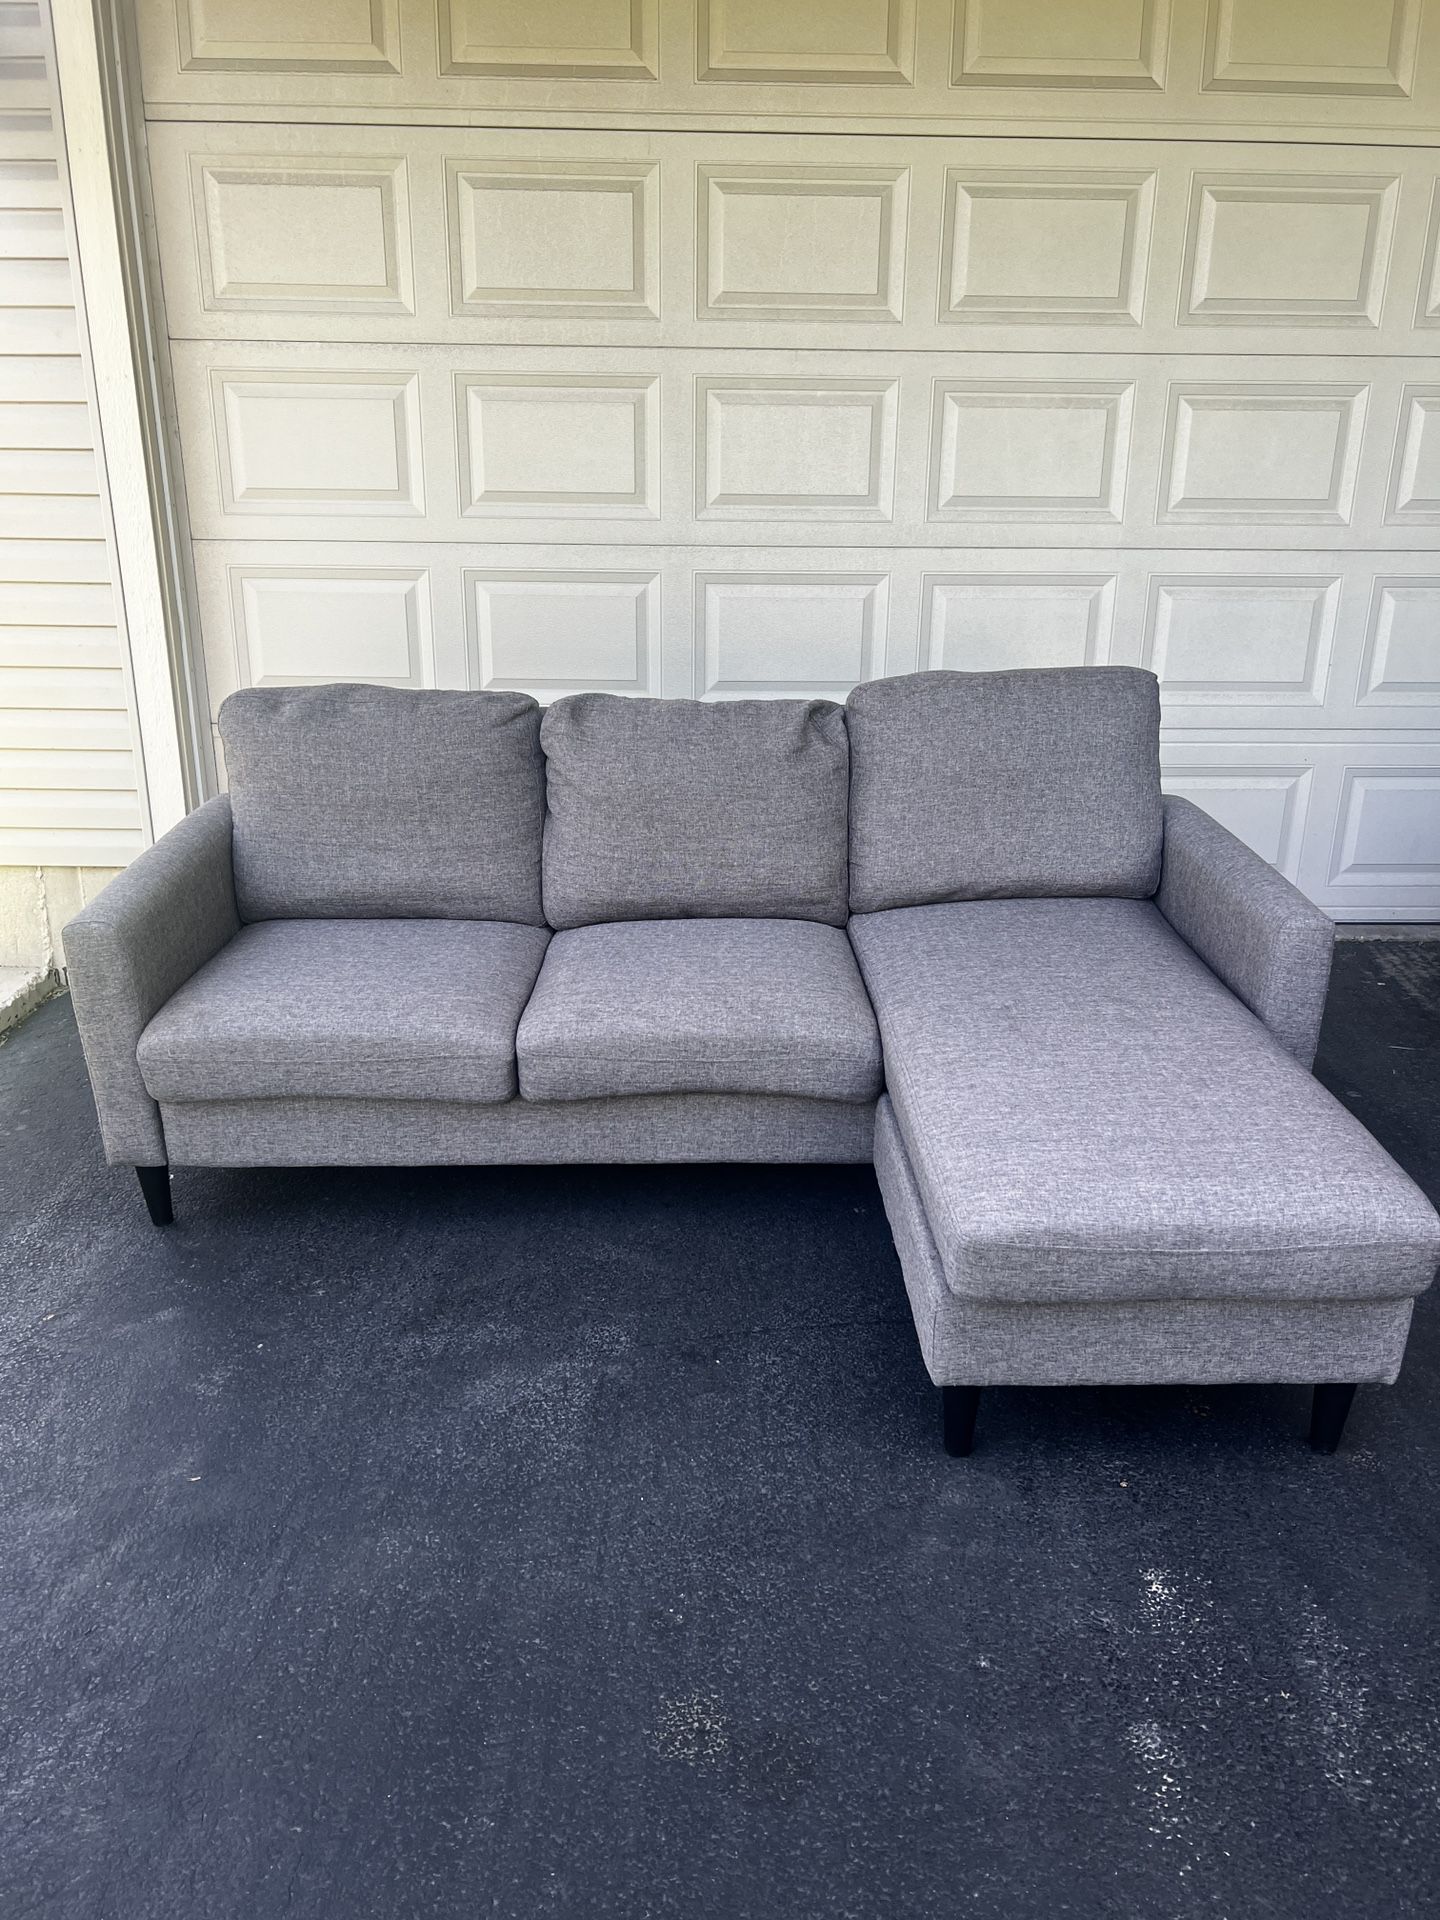 GRAY SECTIONAL COUCH 